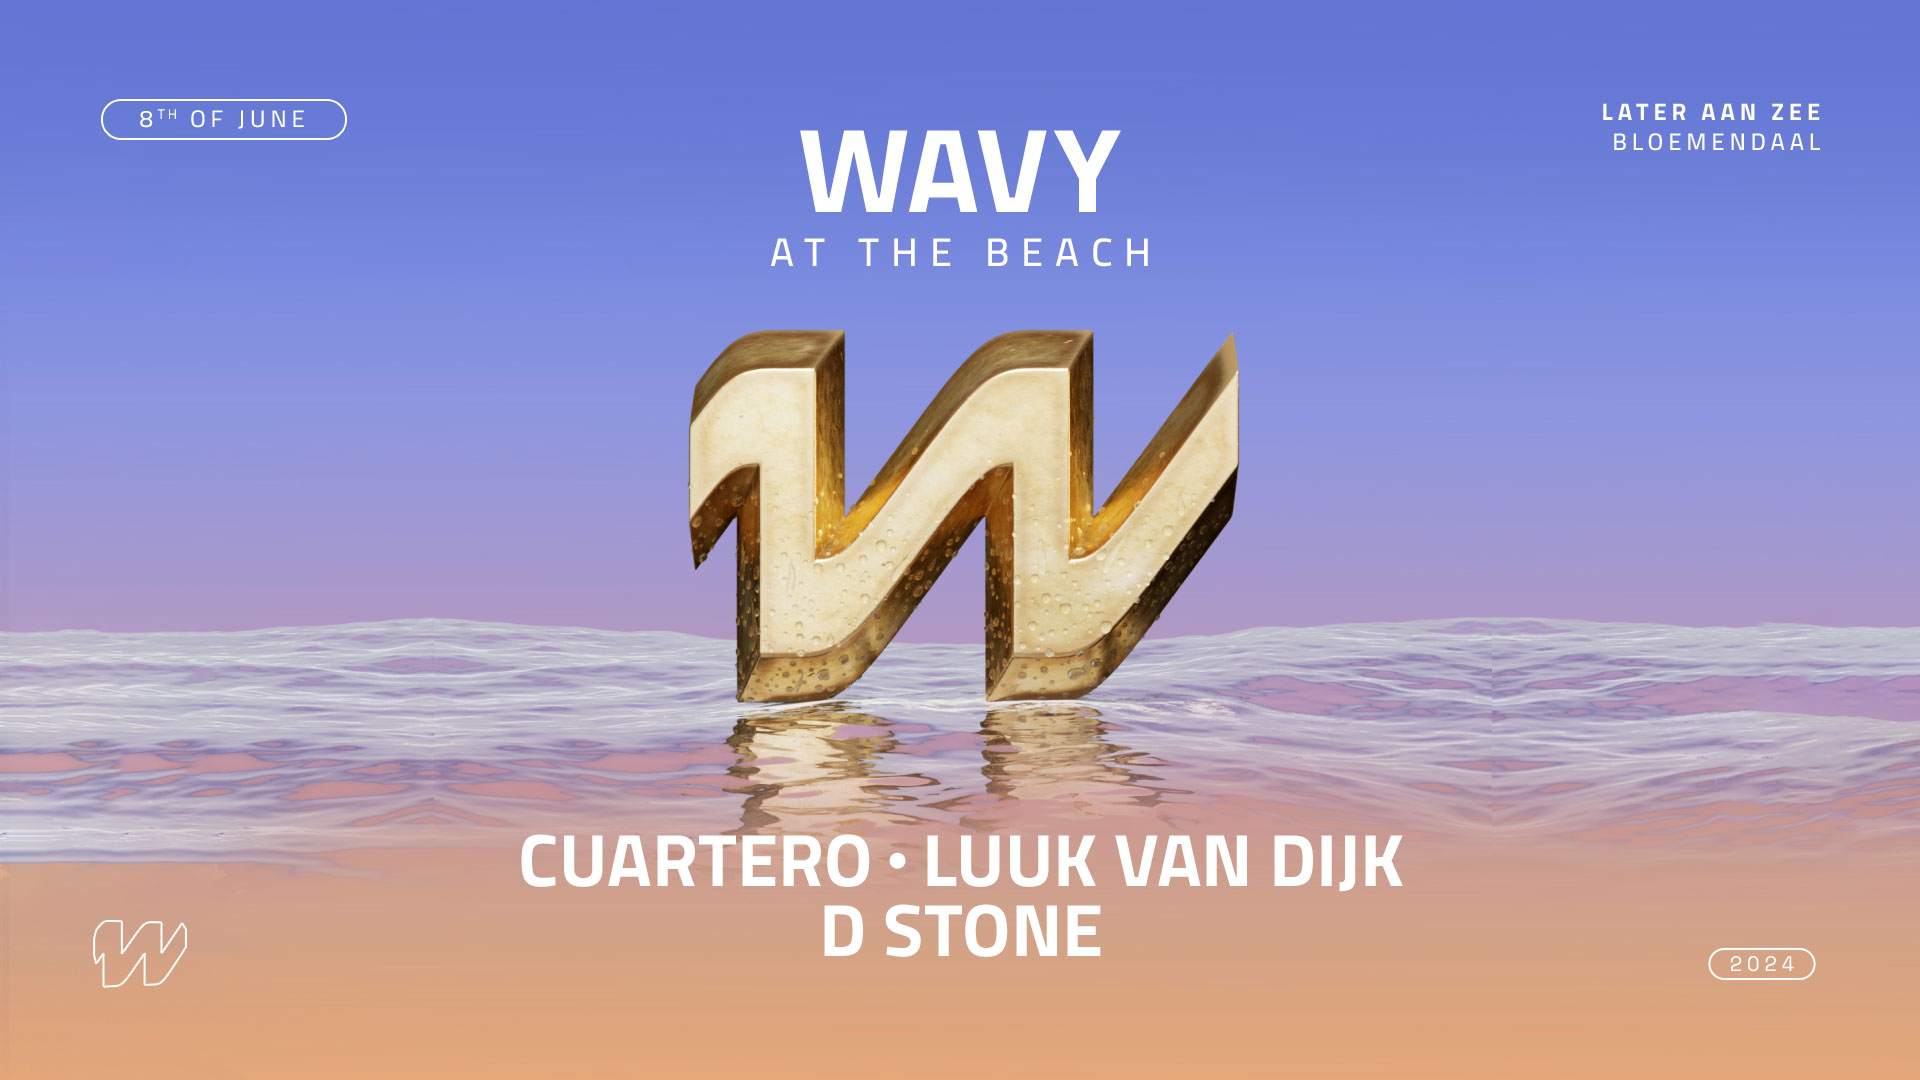 Wavy At The Beach - 8th of June - フライヤー表